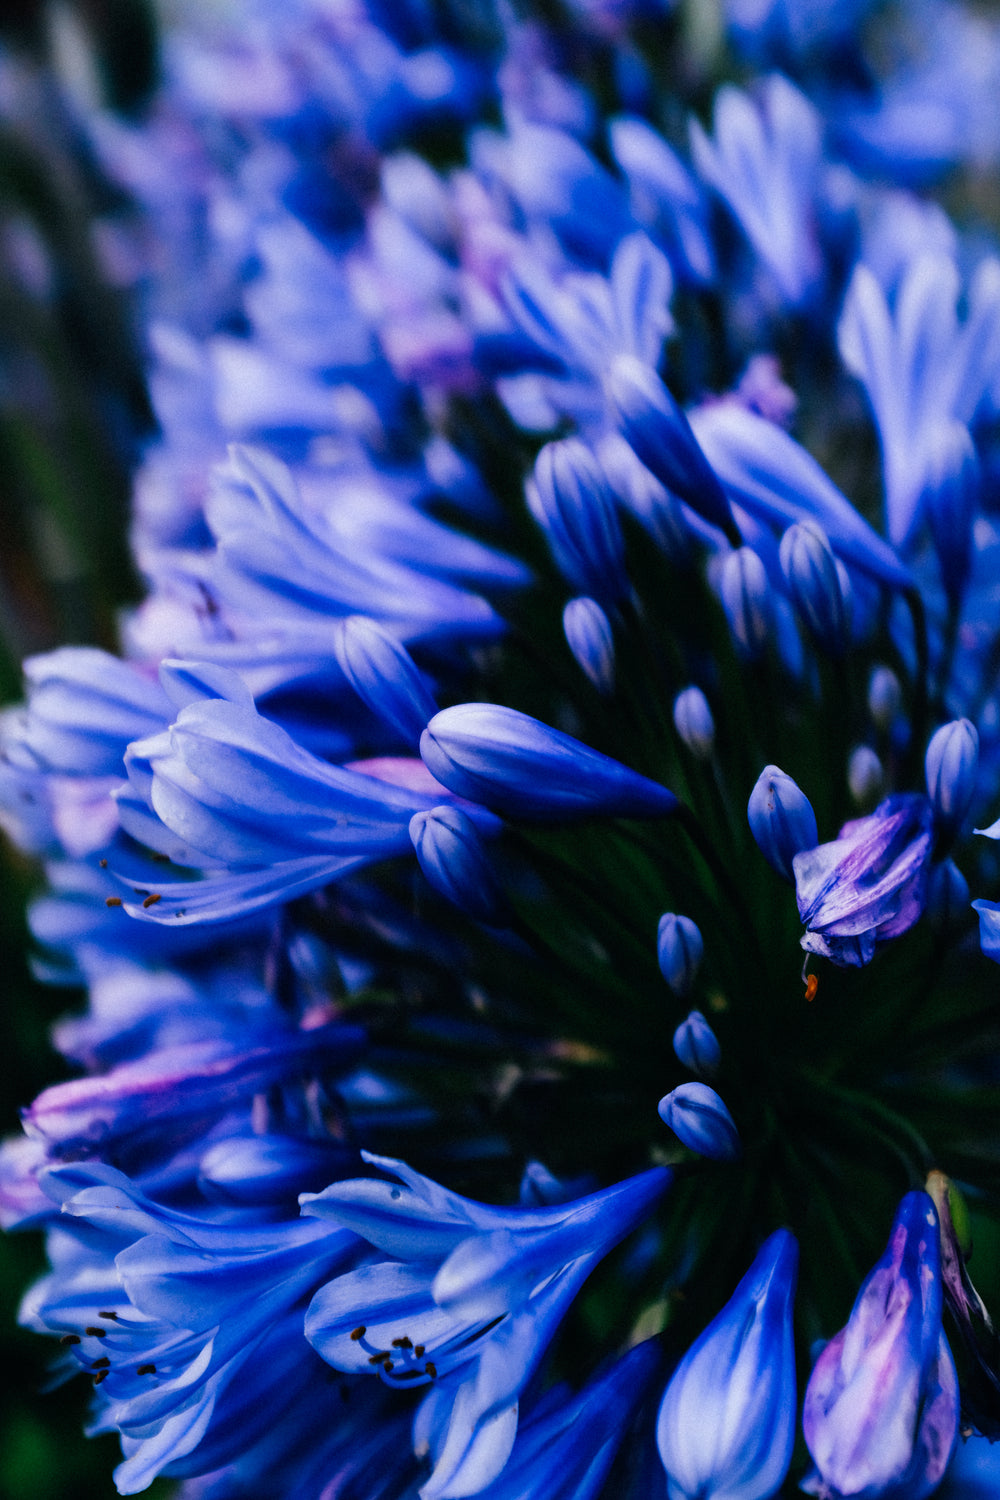 close up of flower petals in blue and purple